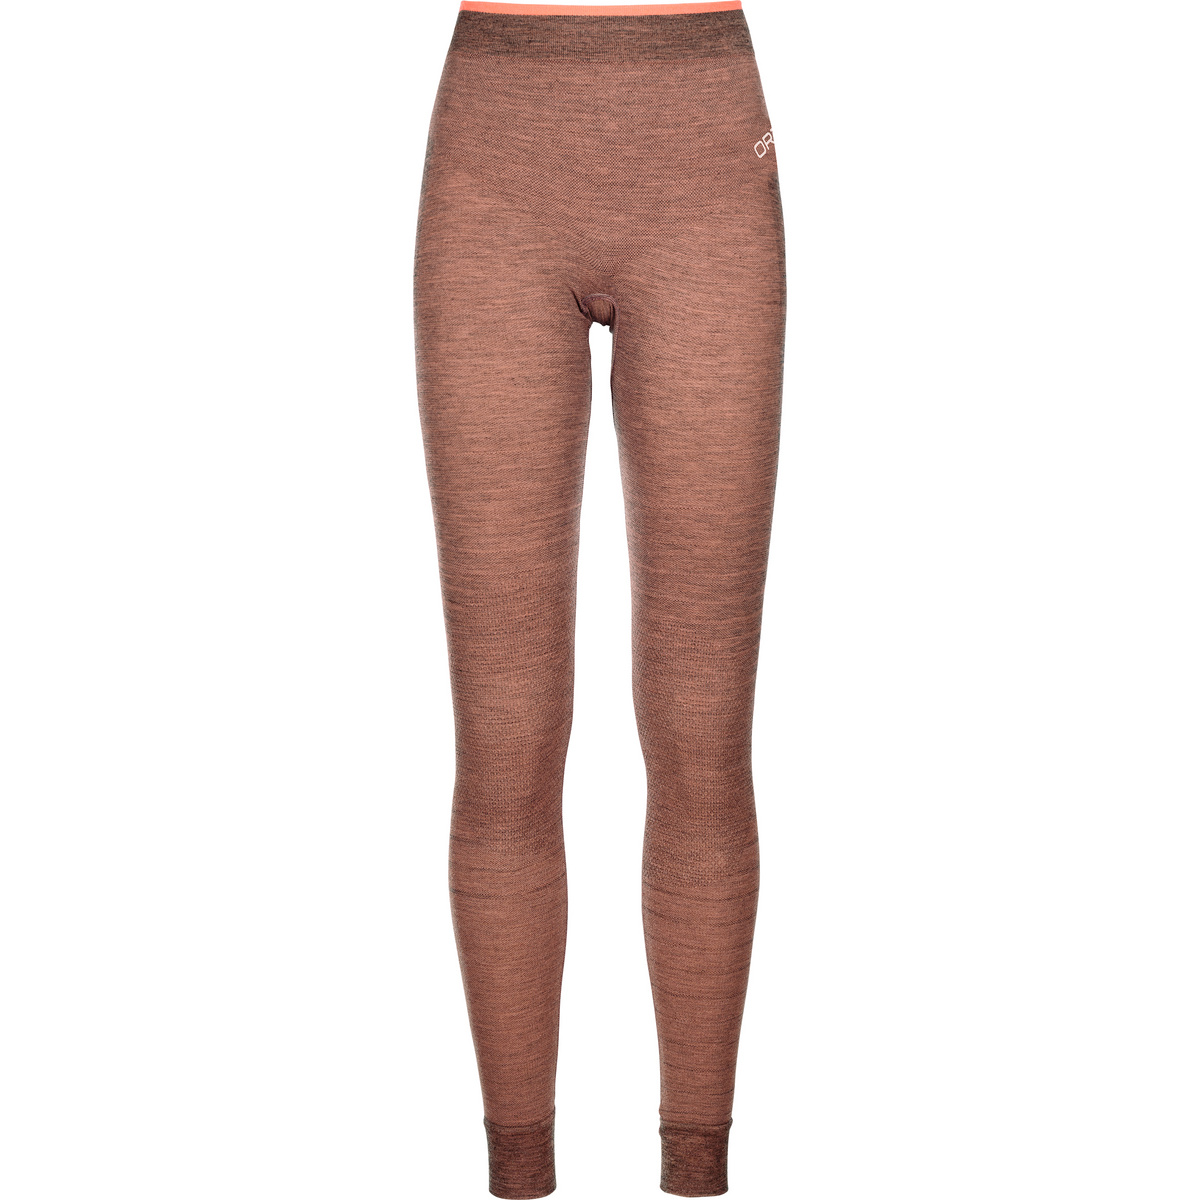 Image of Ortovox Donna Leggings 230 Competition